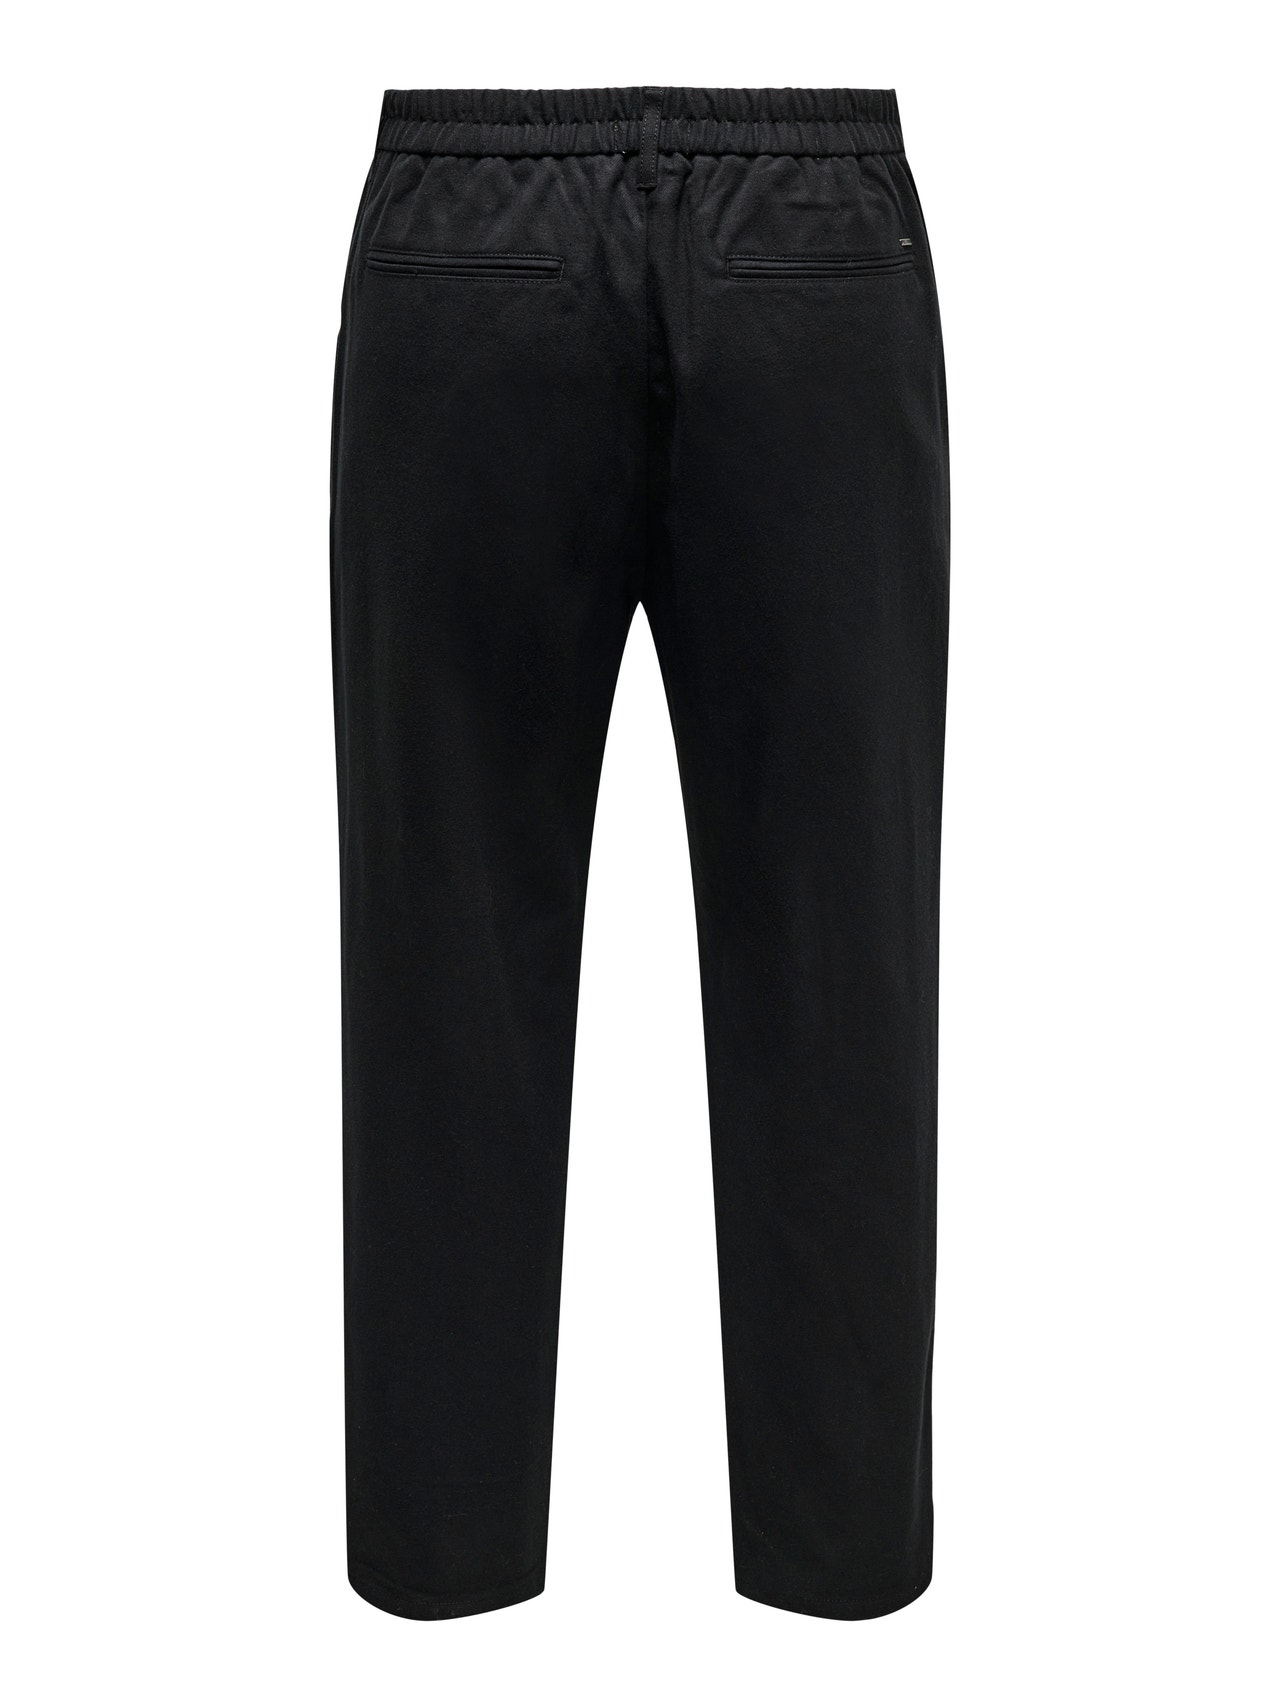 ONLY & SONS Classic trousers -Black - 22023478